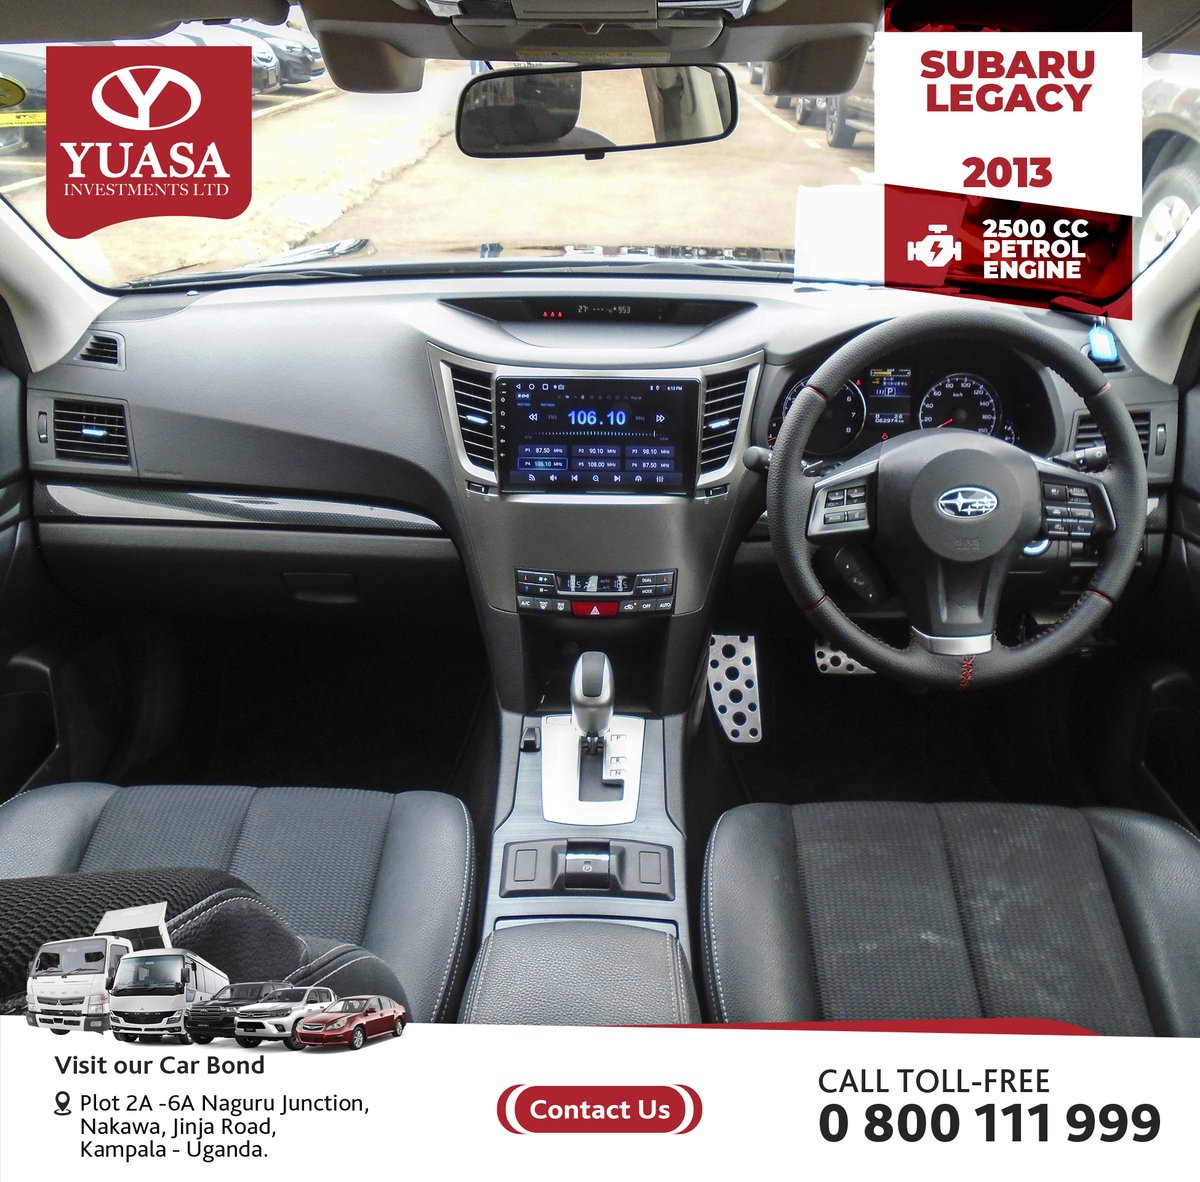 Gear Up for the Weekend with YUASA! Deals That'll Drive You Wild!
Call us today at 0800 111 999 to schedule your test drive.
Visit our showroom at Nakawa and let our friendly team guide you to your next adventure!
#YuasaLtdUg #may #Cars #DriveYourDream #usedcars #carsofinstagram